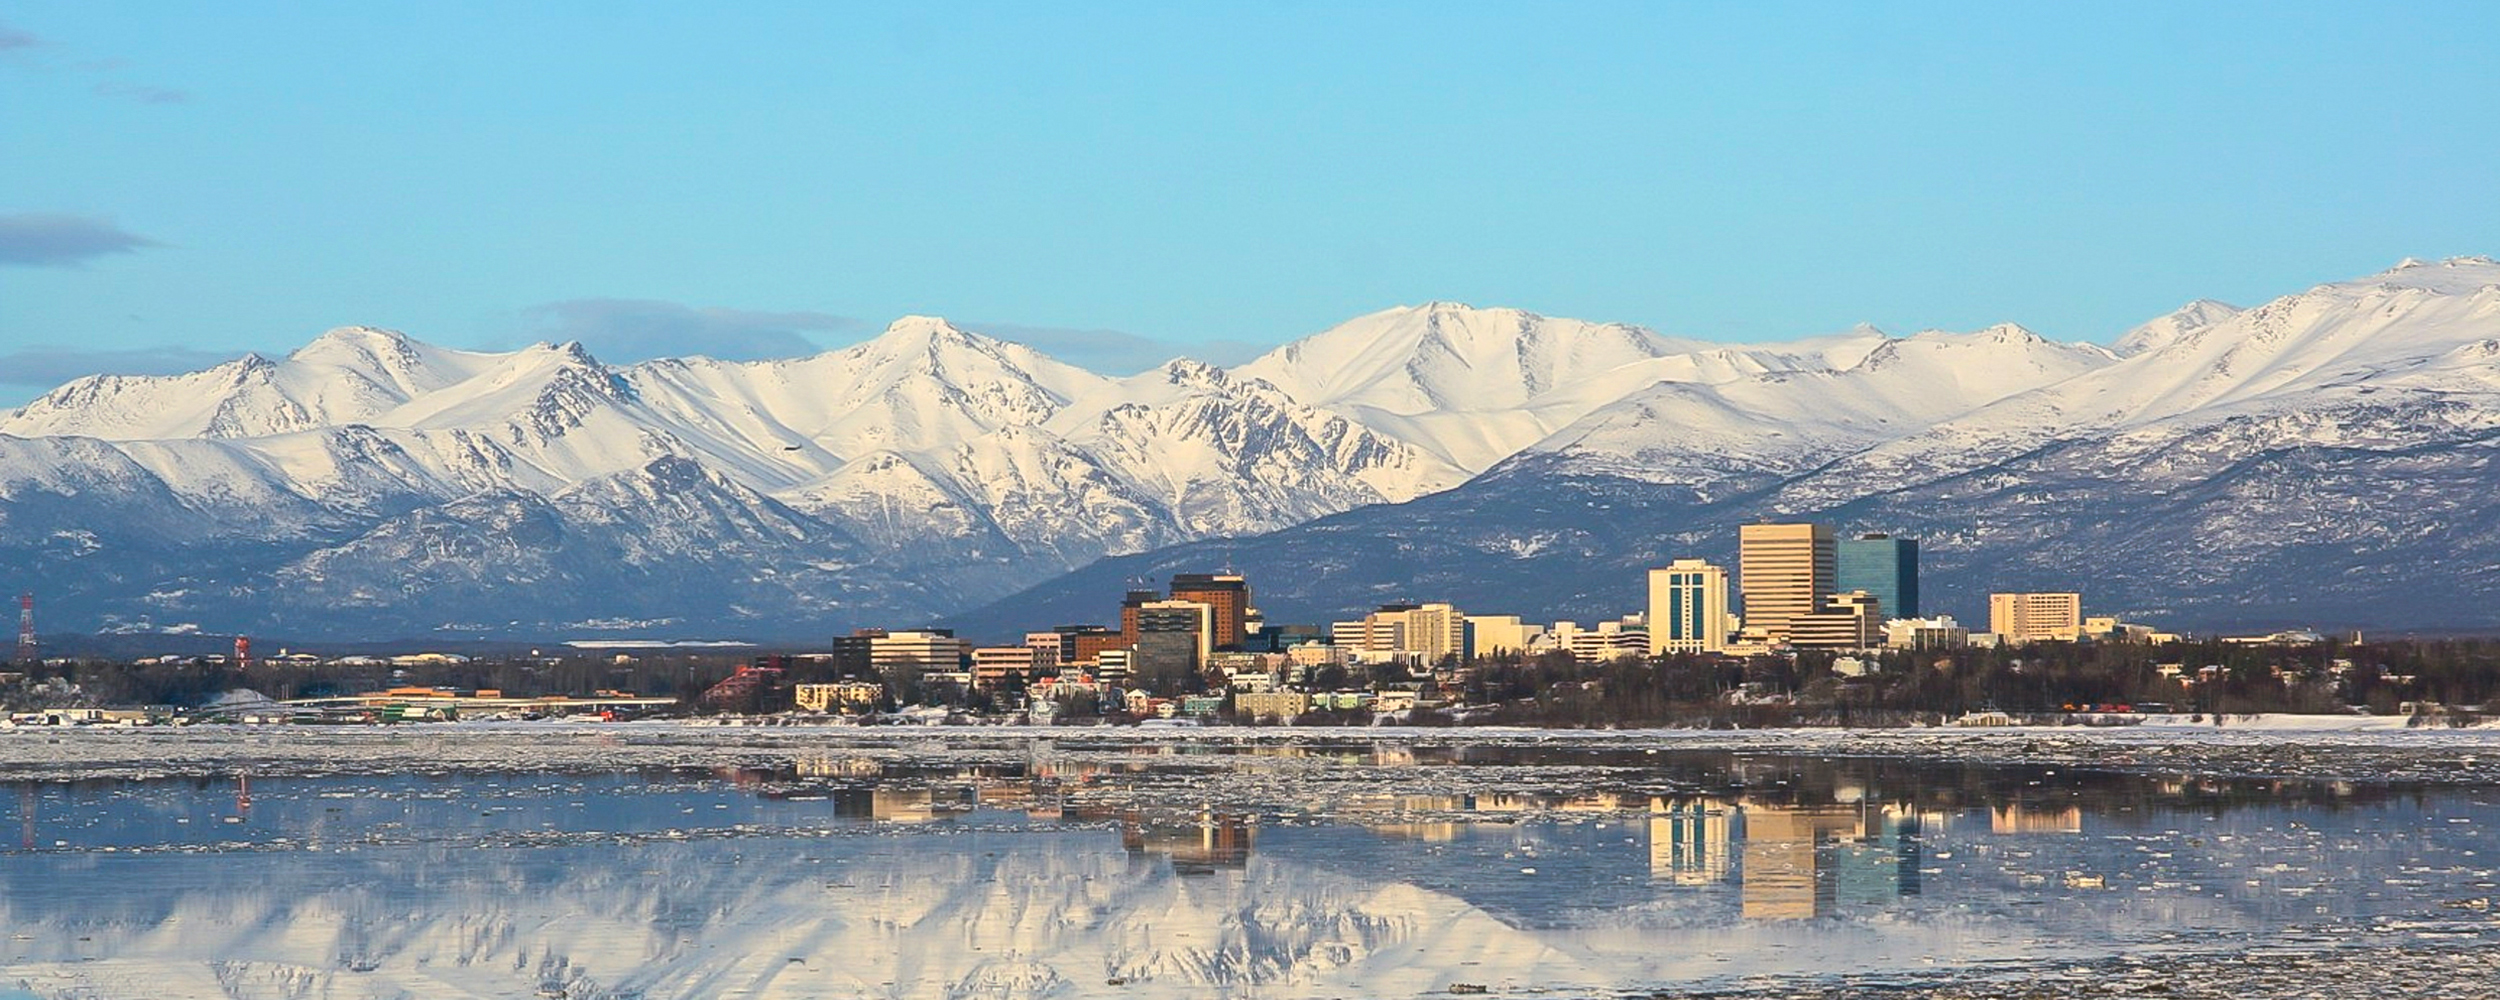 Alaska view from the ocean with the city and snow-covered mountains in the distance.